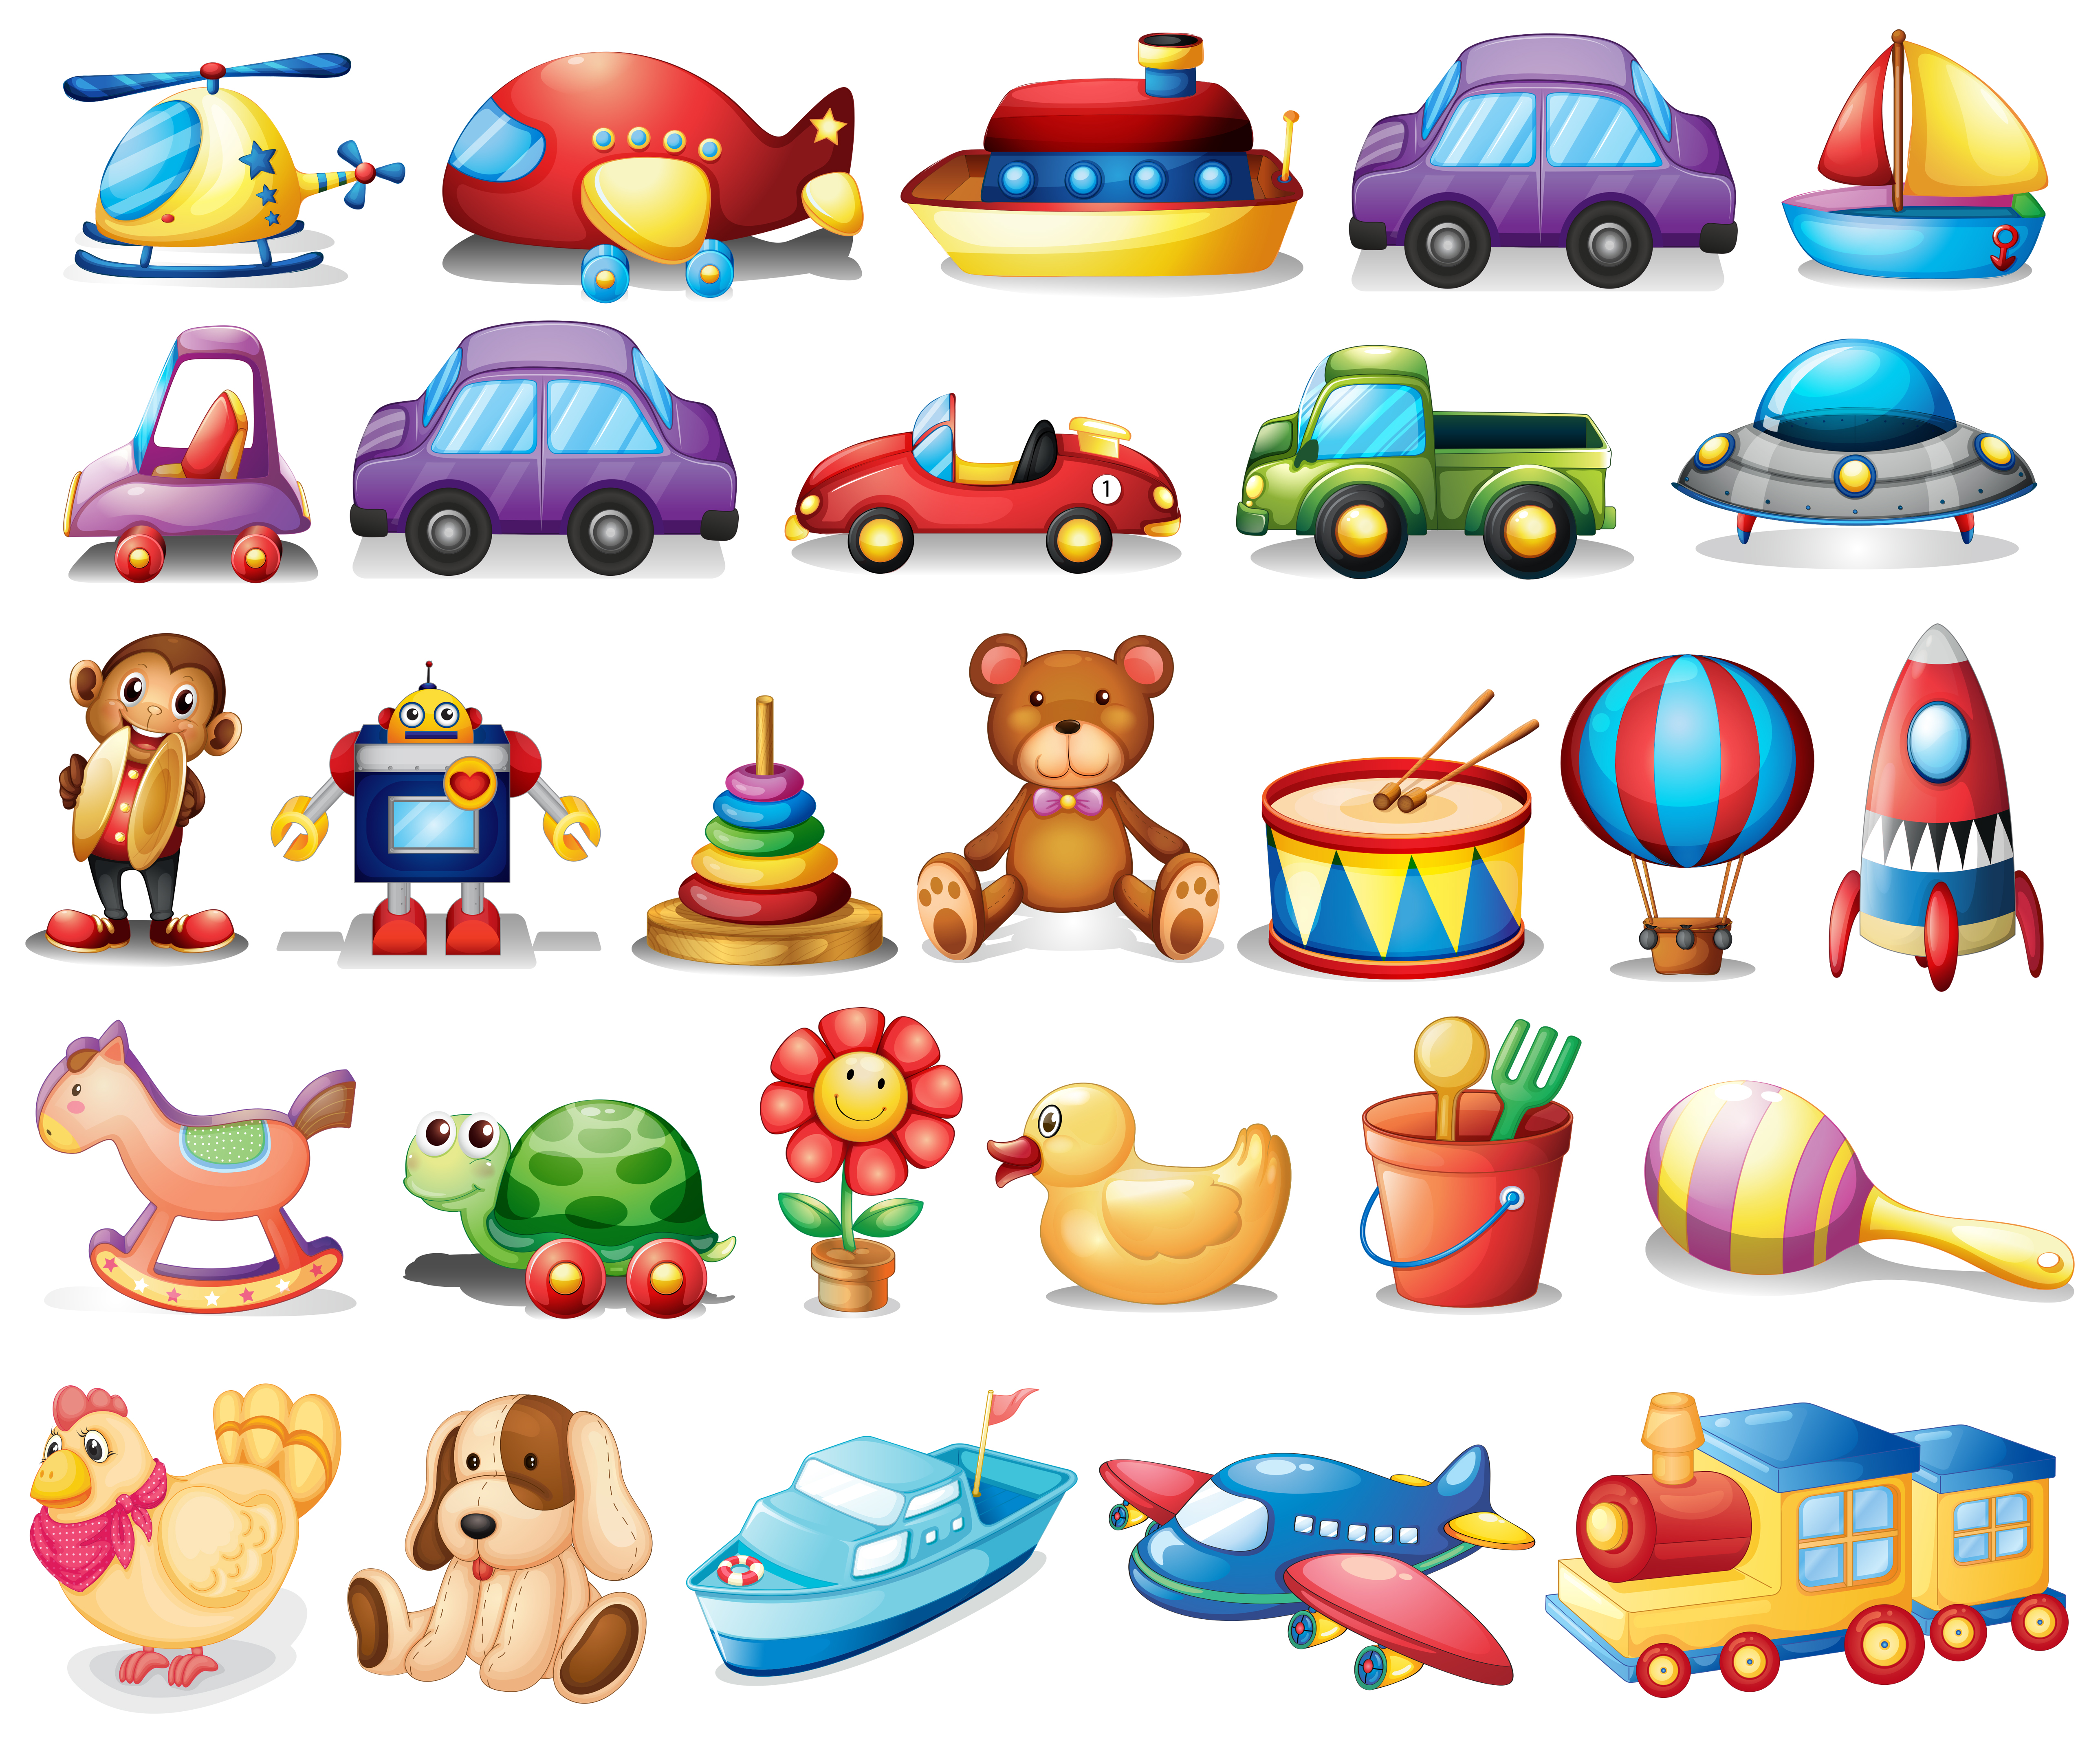 Collection of toys 418189 Download Free Vectors Clipart Graphics & Vector Art